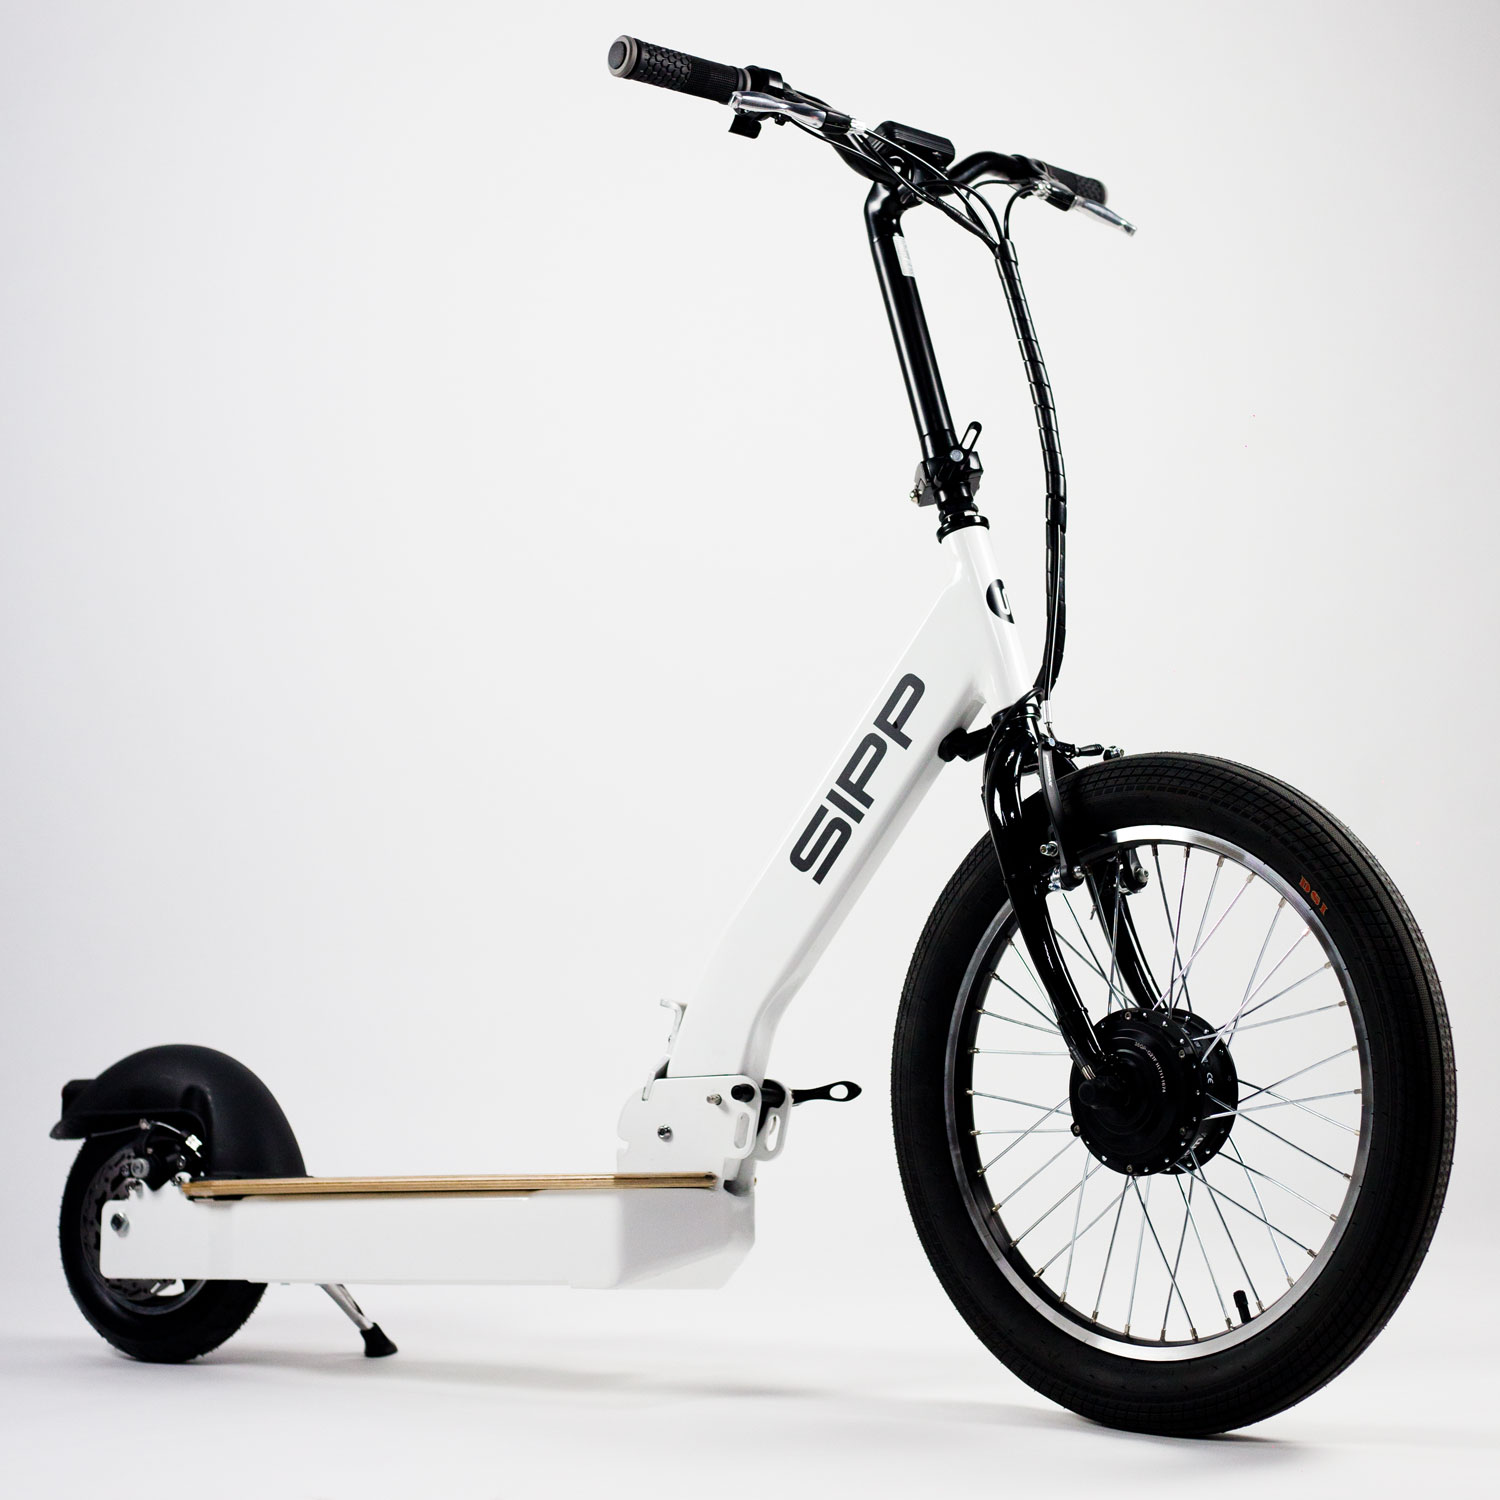 SIPP SCOOTER BIKE - Patinete Eléctrico y Freestyle